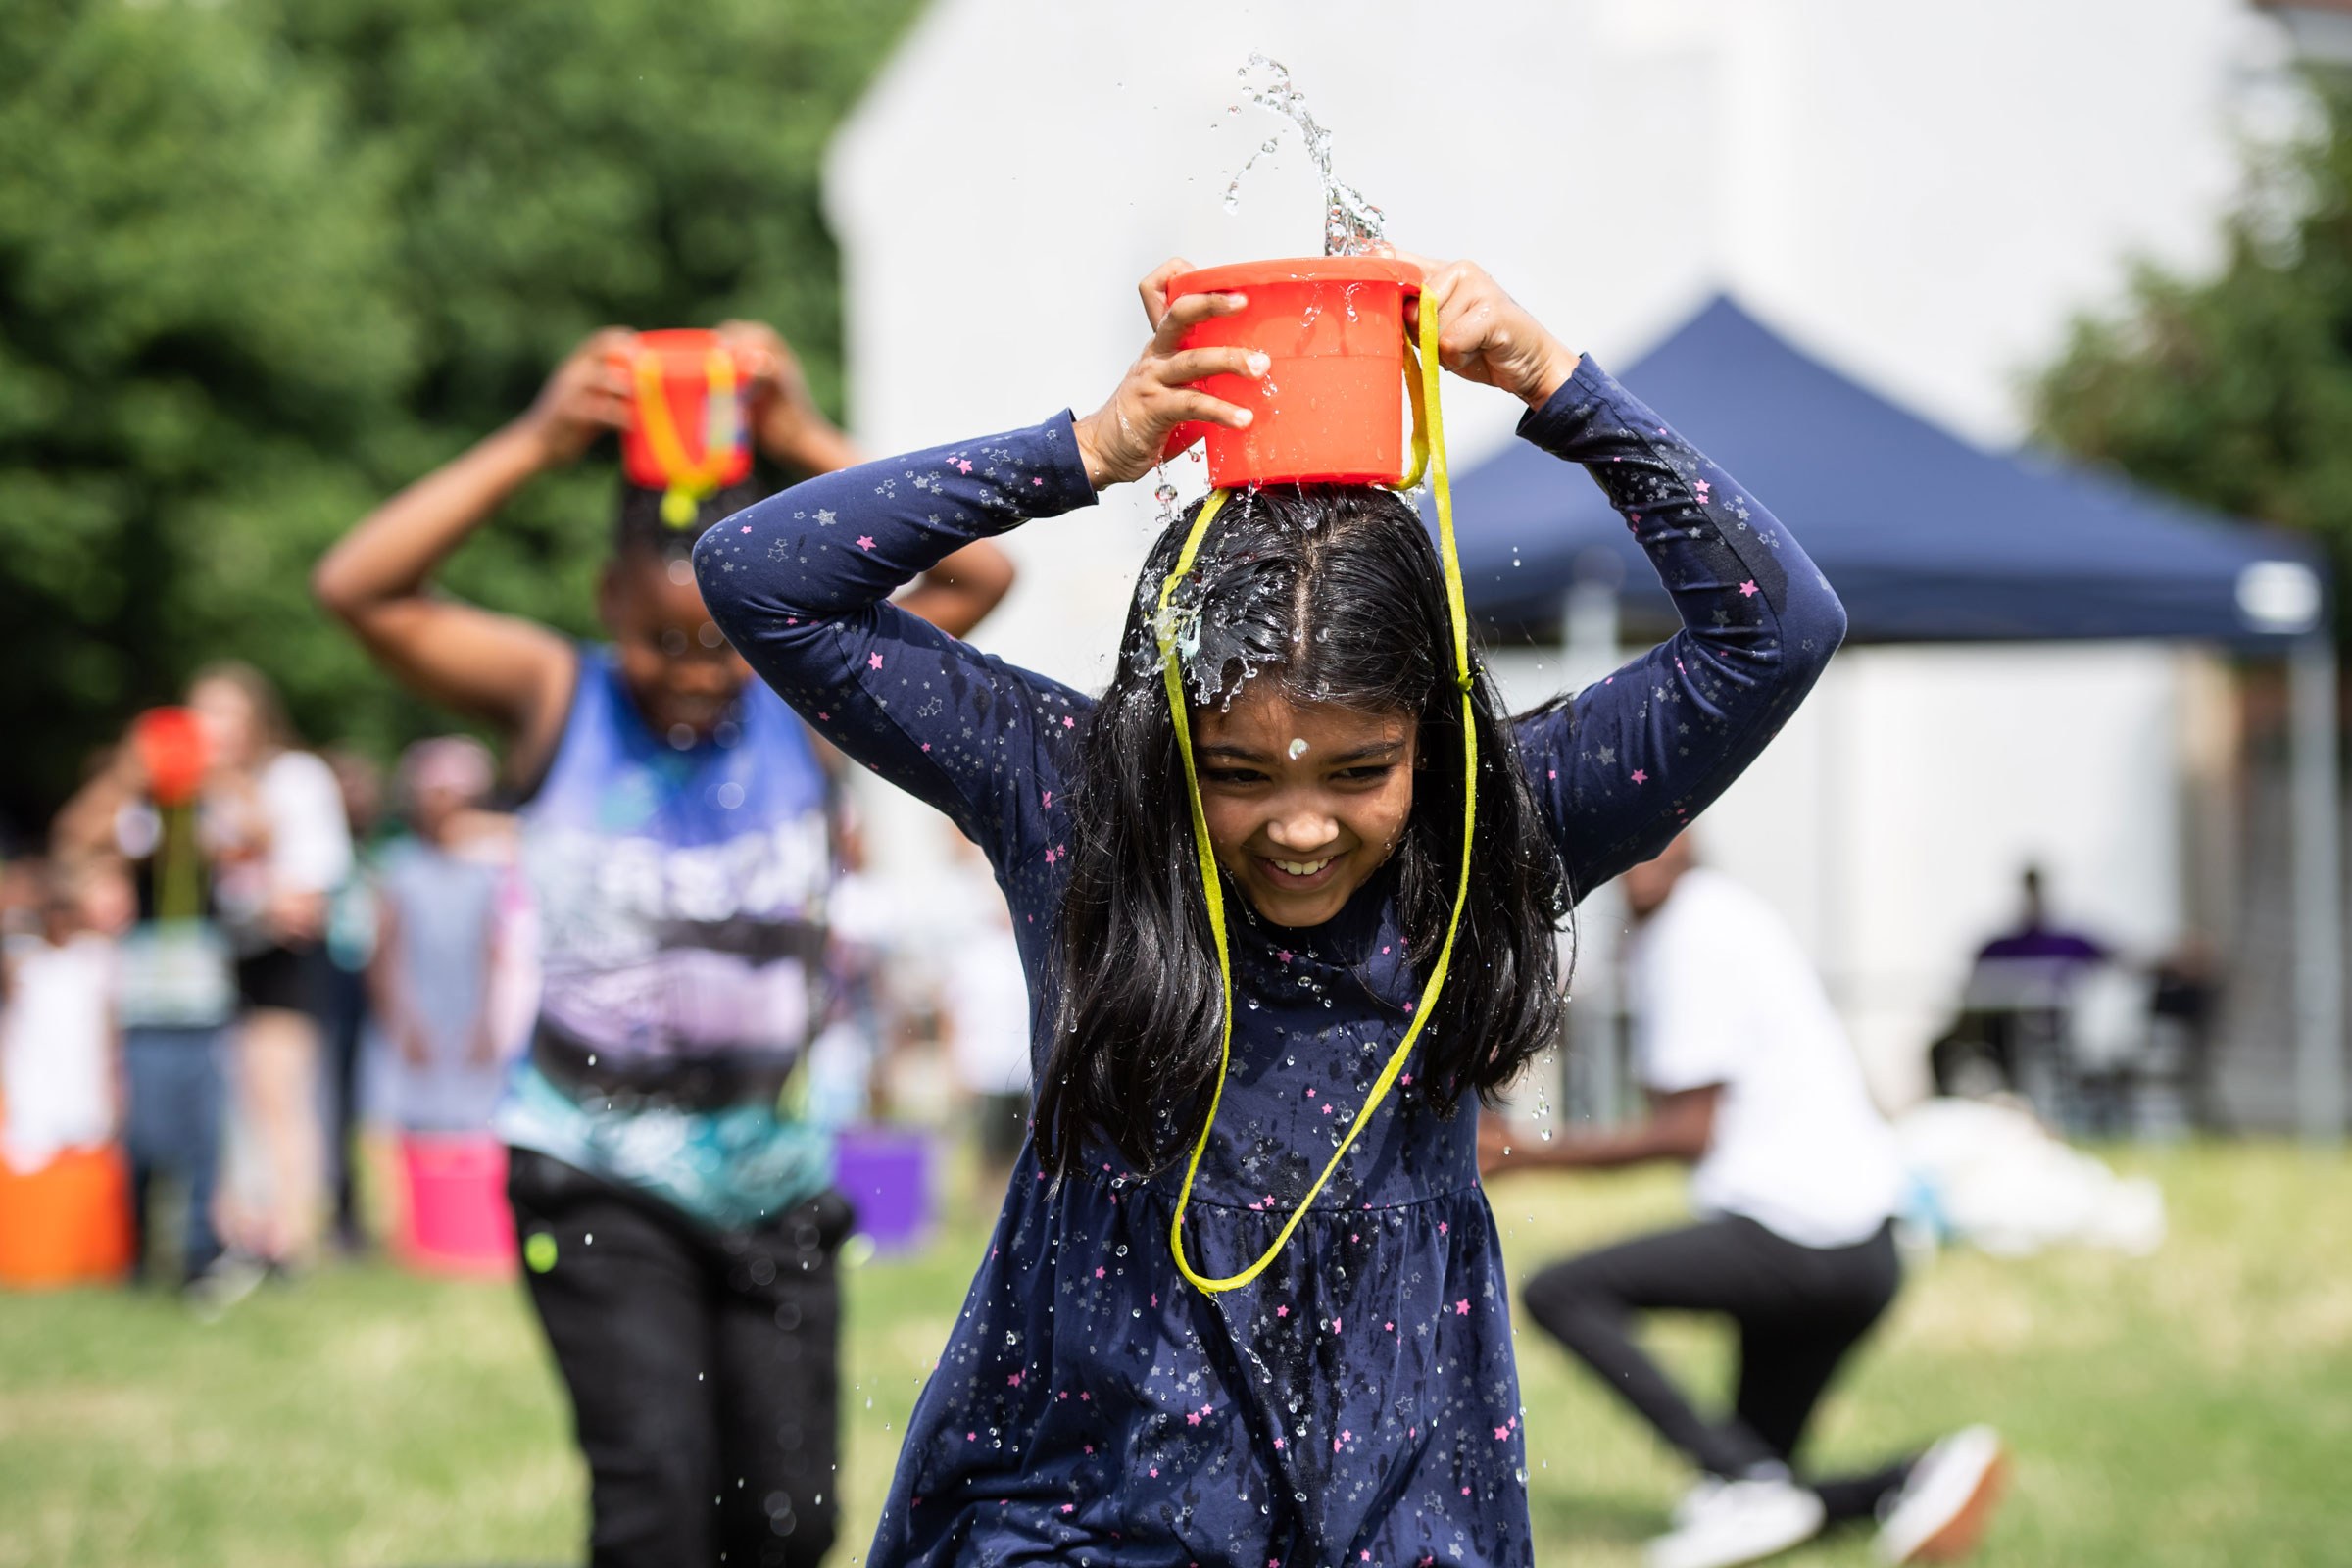 A girl with a bucket of water on her head, laughing